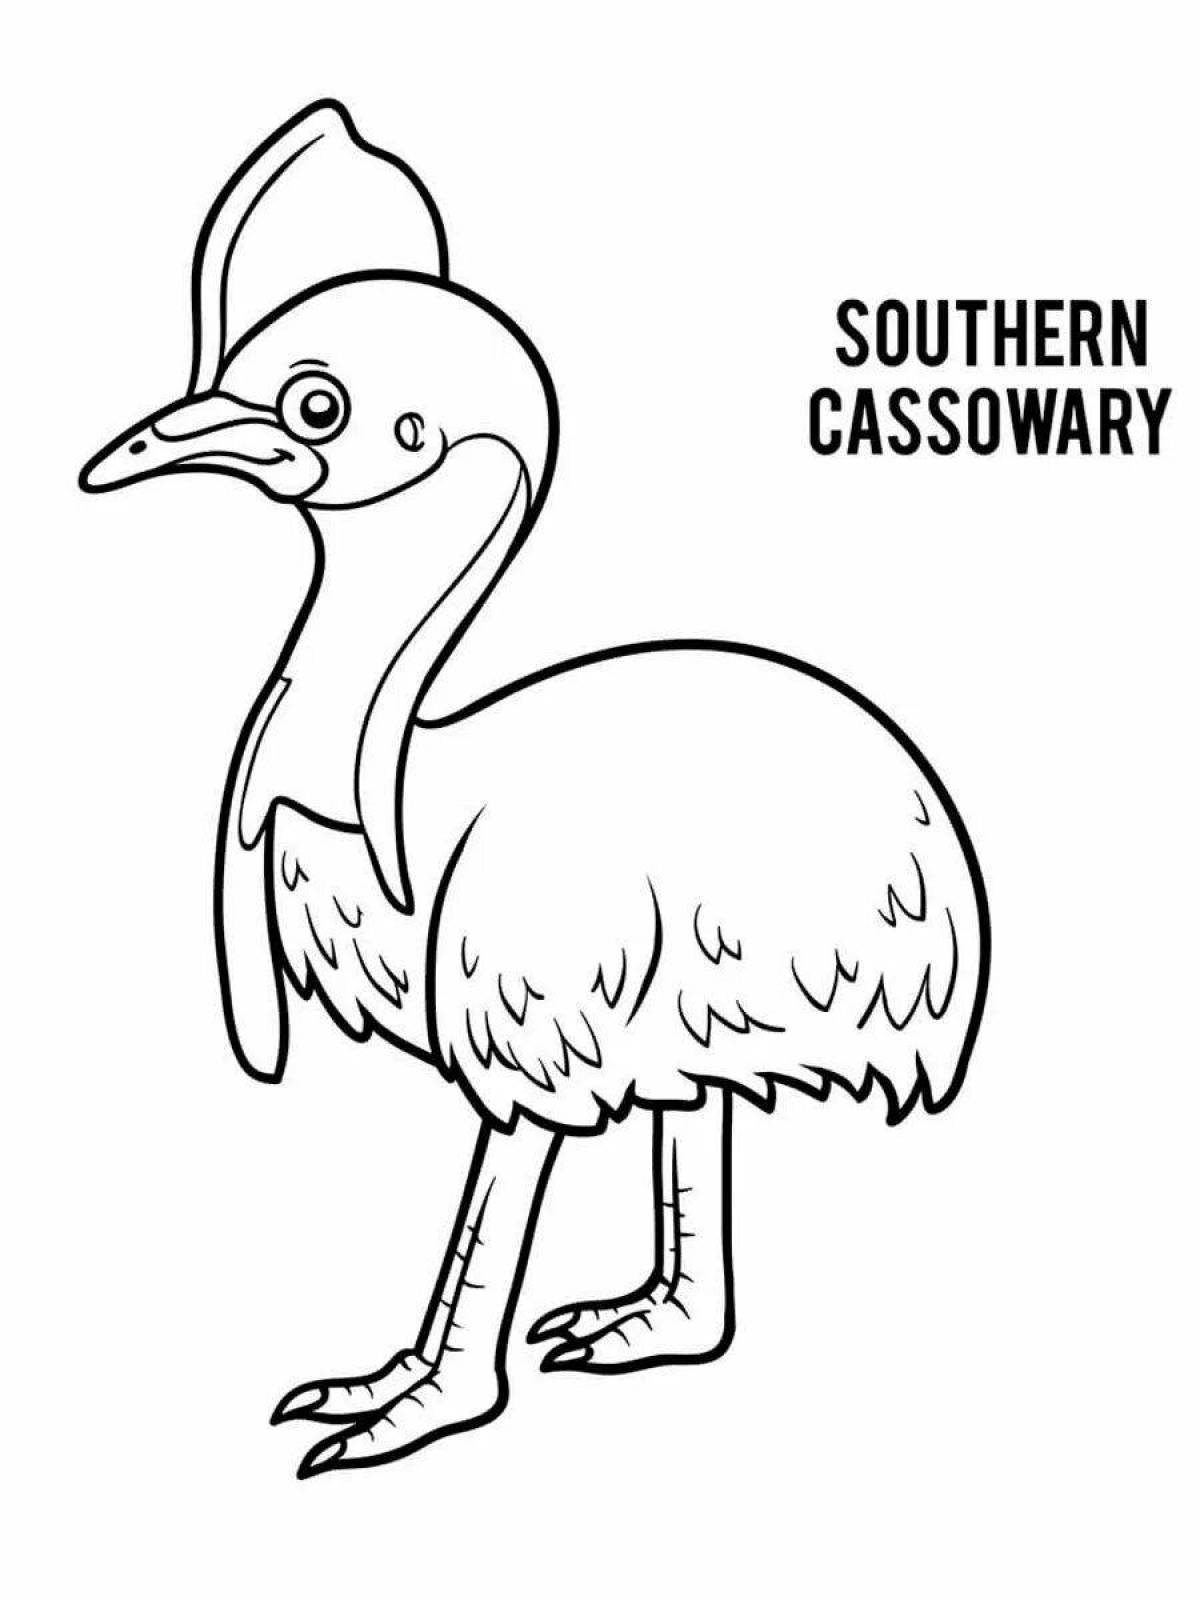 A wonderful cassowary coloring book for kids